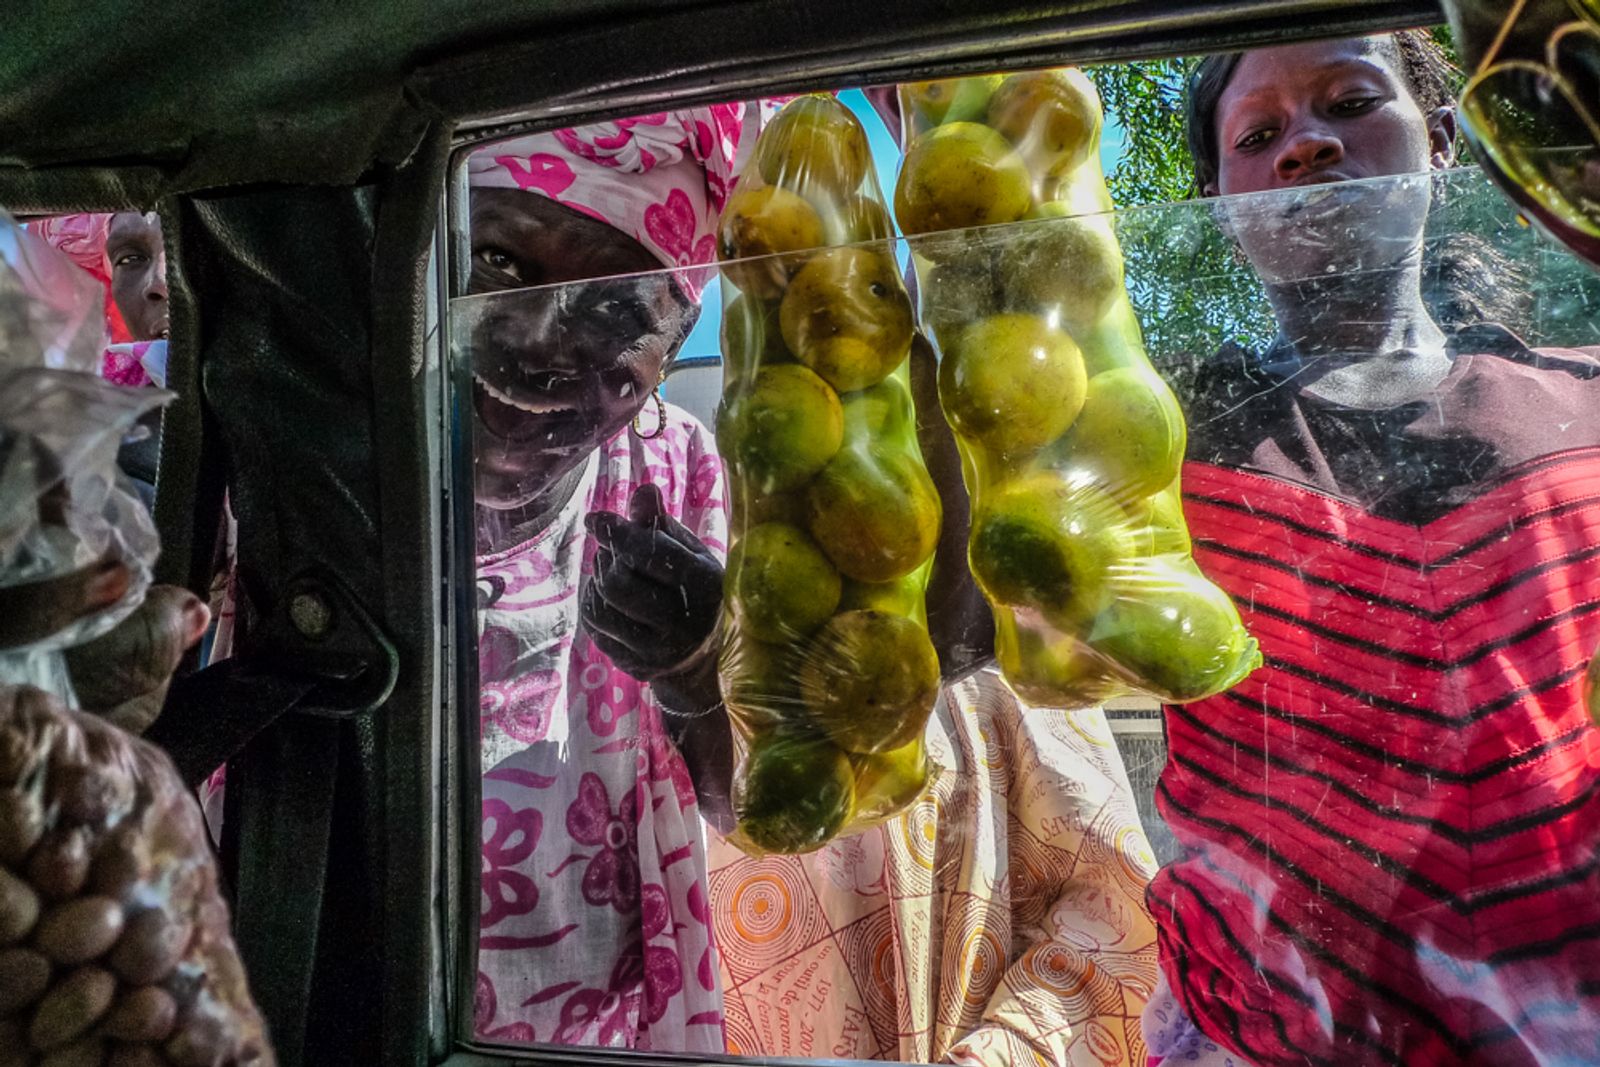 © Werner Mansholt - Image from the Senegal Hawkers photography project